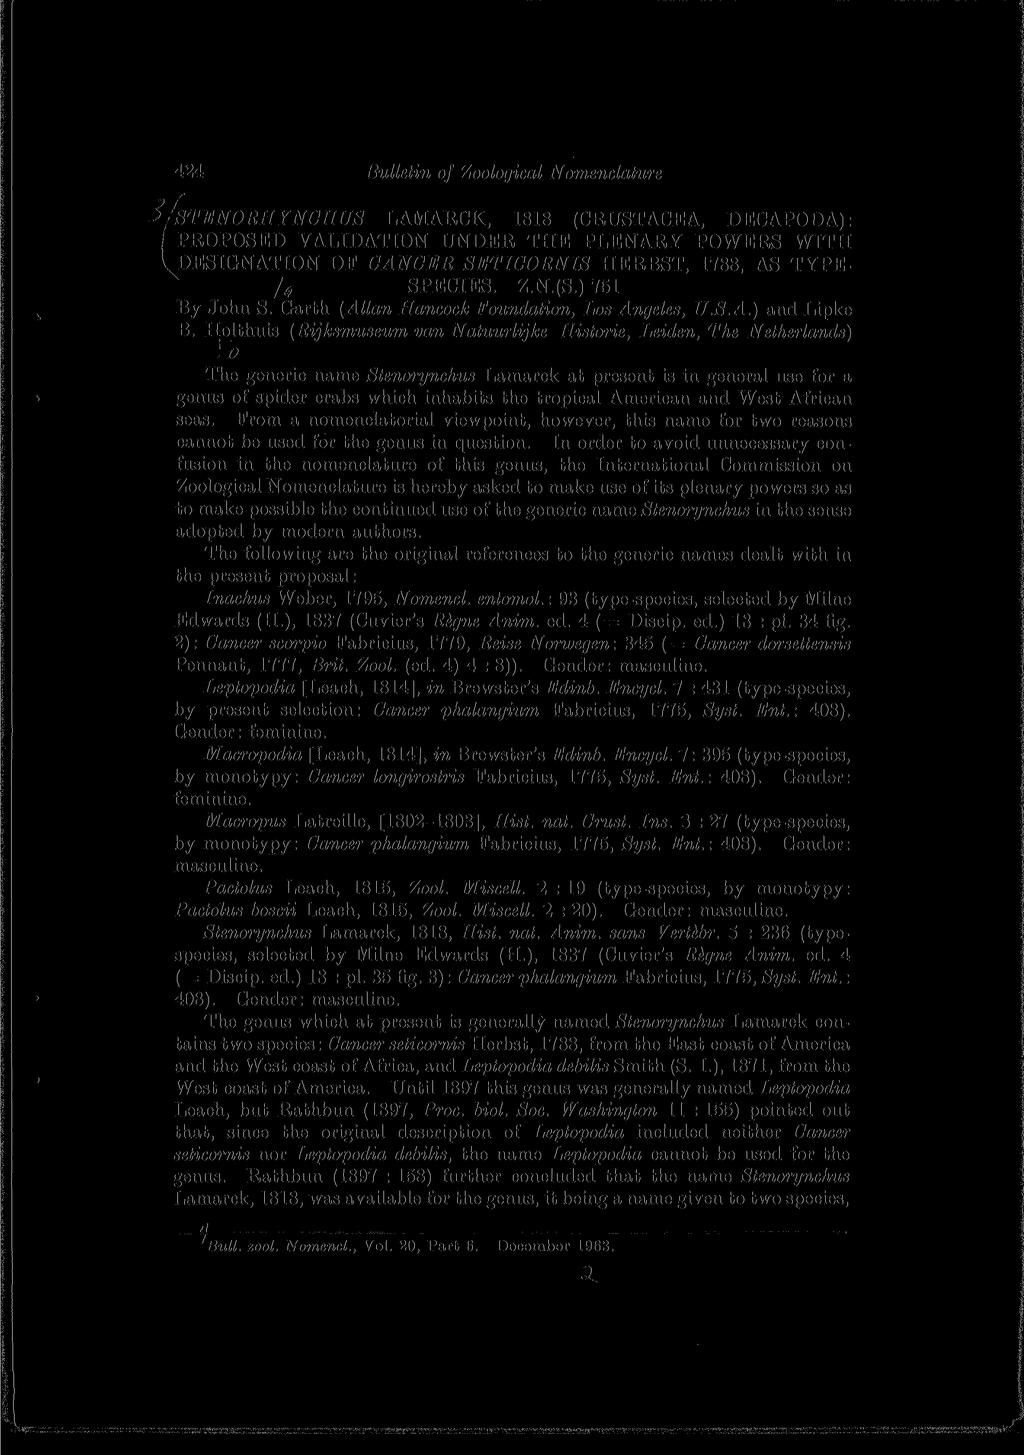 424 Bulletin of Zoological Nomenclature r >S TEN ORH YNCH US LAMARCK, 1818 (CRUSTACEA, DECAPODA): PROPOSED VALIDATION UNDER THE PLENARY POWERS WITH DESIGNATION OF CANCER SETICORNIS HERBST, 1788, AS